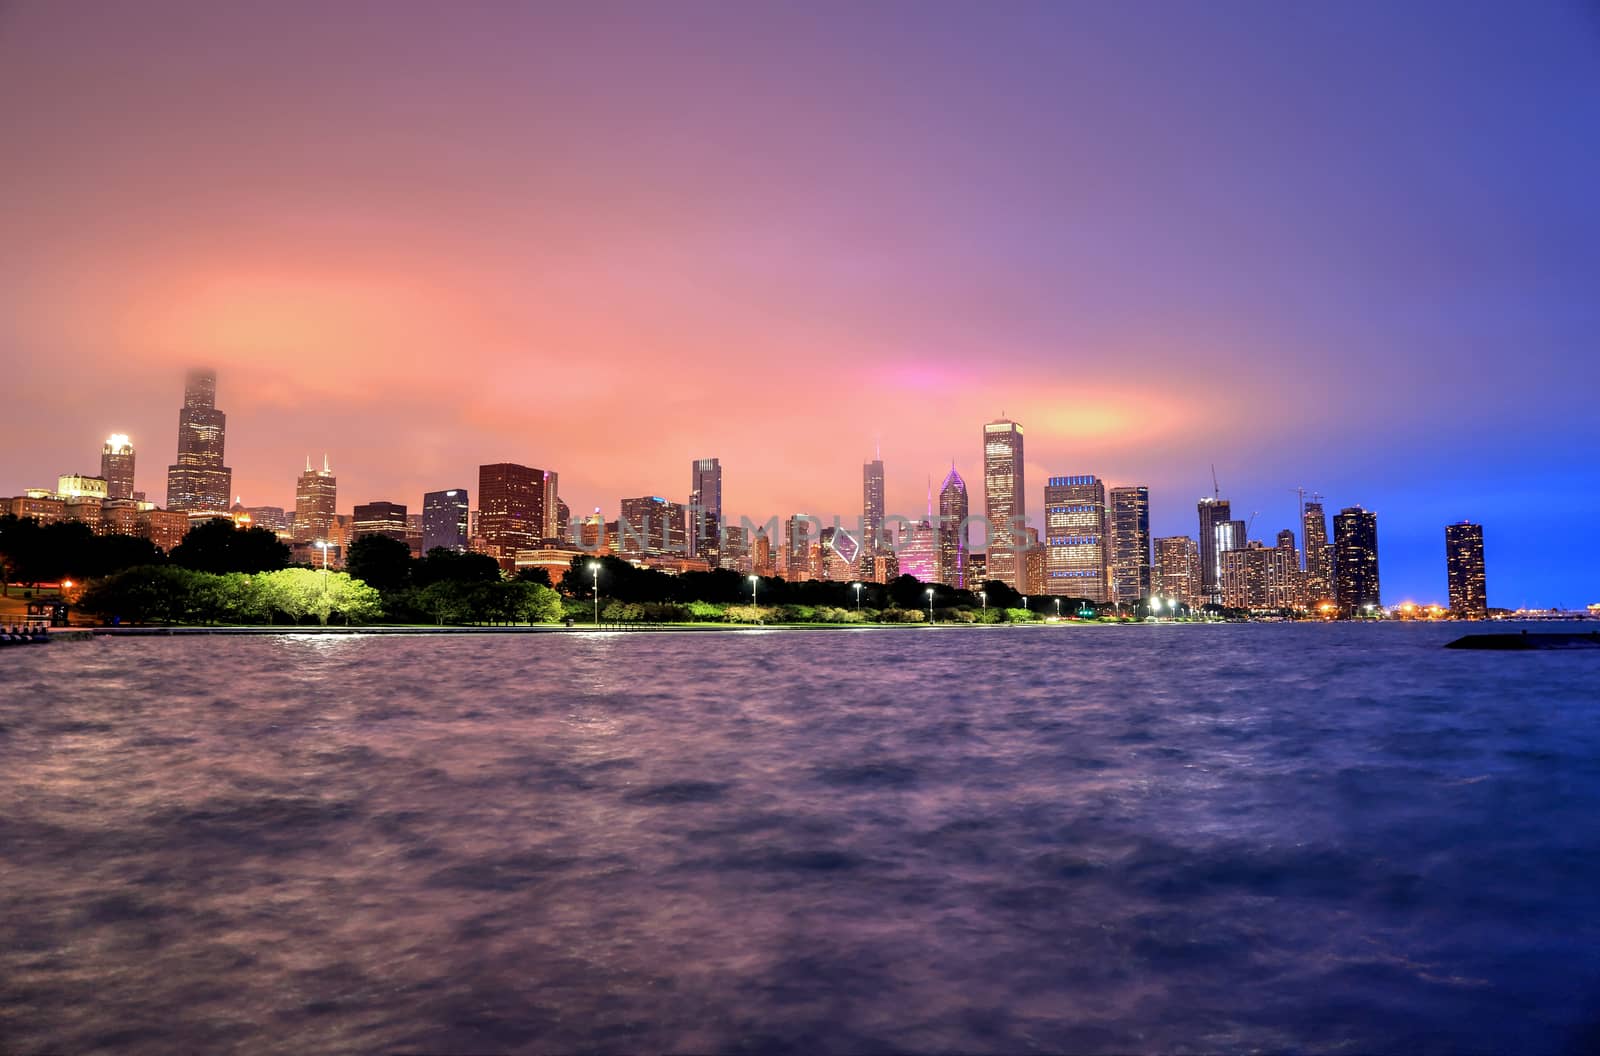 The Chicago skyline at night after a storm across Lake Michigan.